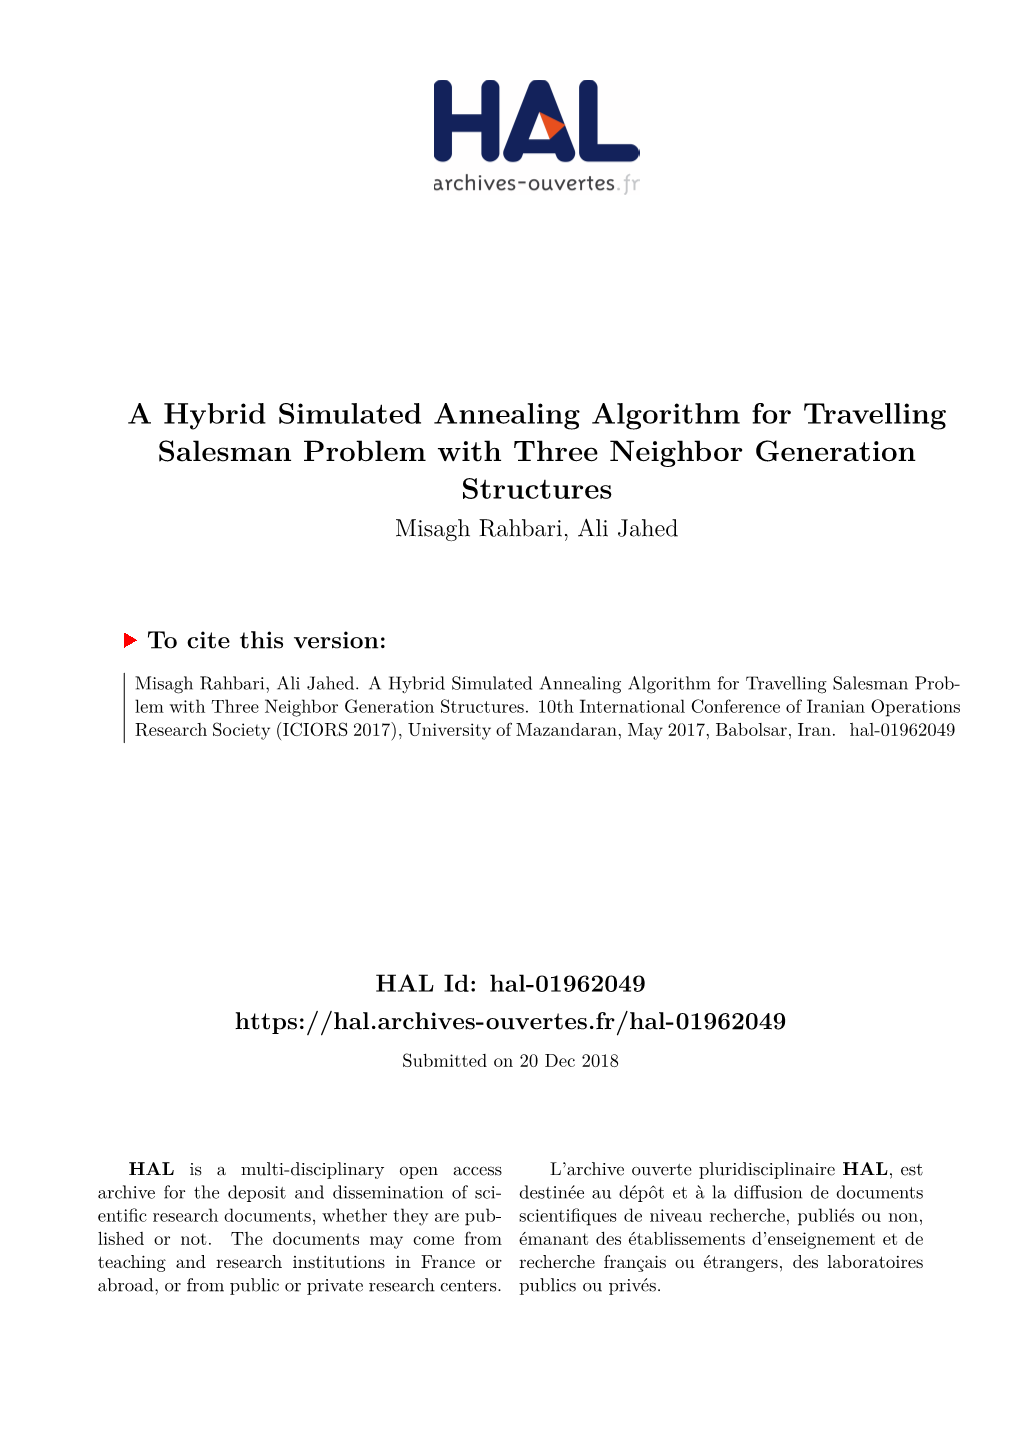 A Hybrid Simulated Annealing Algorithm for Travelling Salesman Problem with Three Neighbor Generation Structures Misagh Rahbari, Ali Jahed